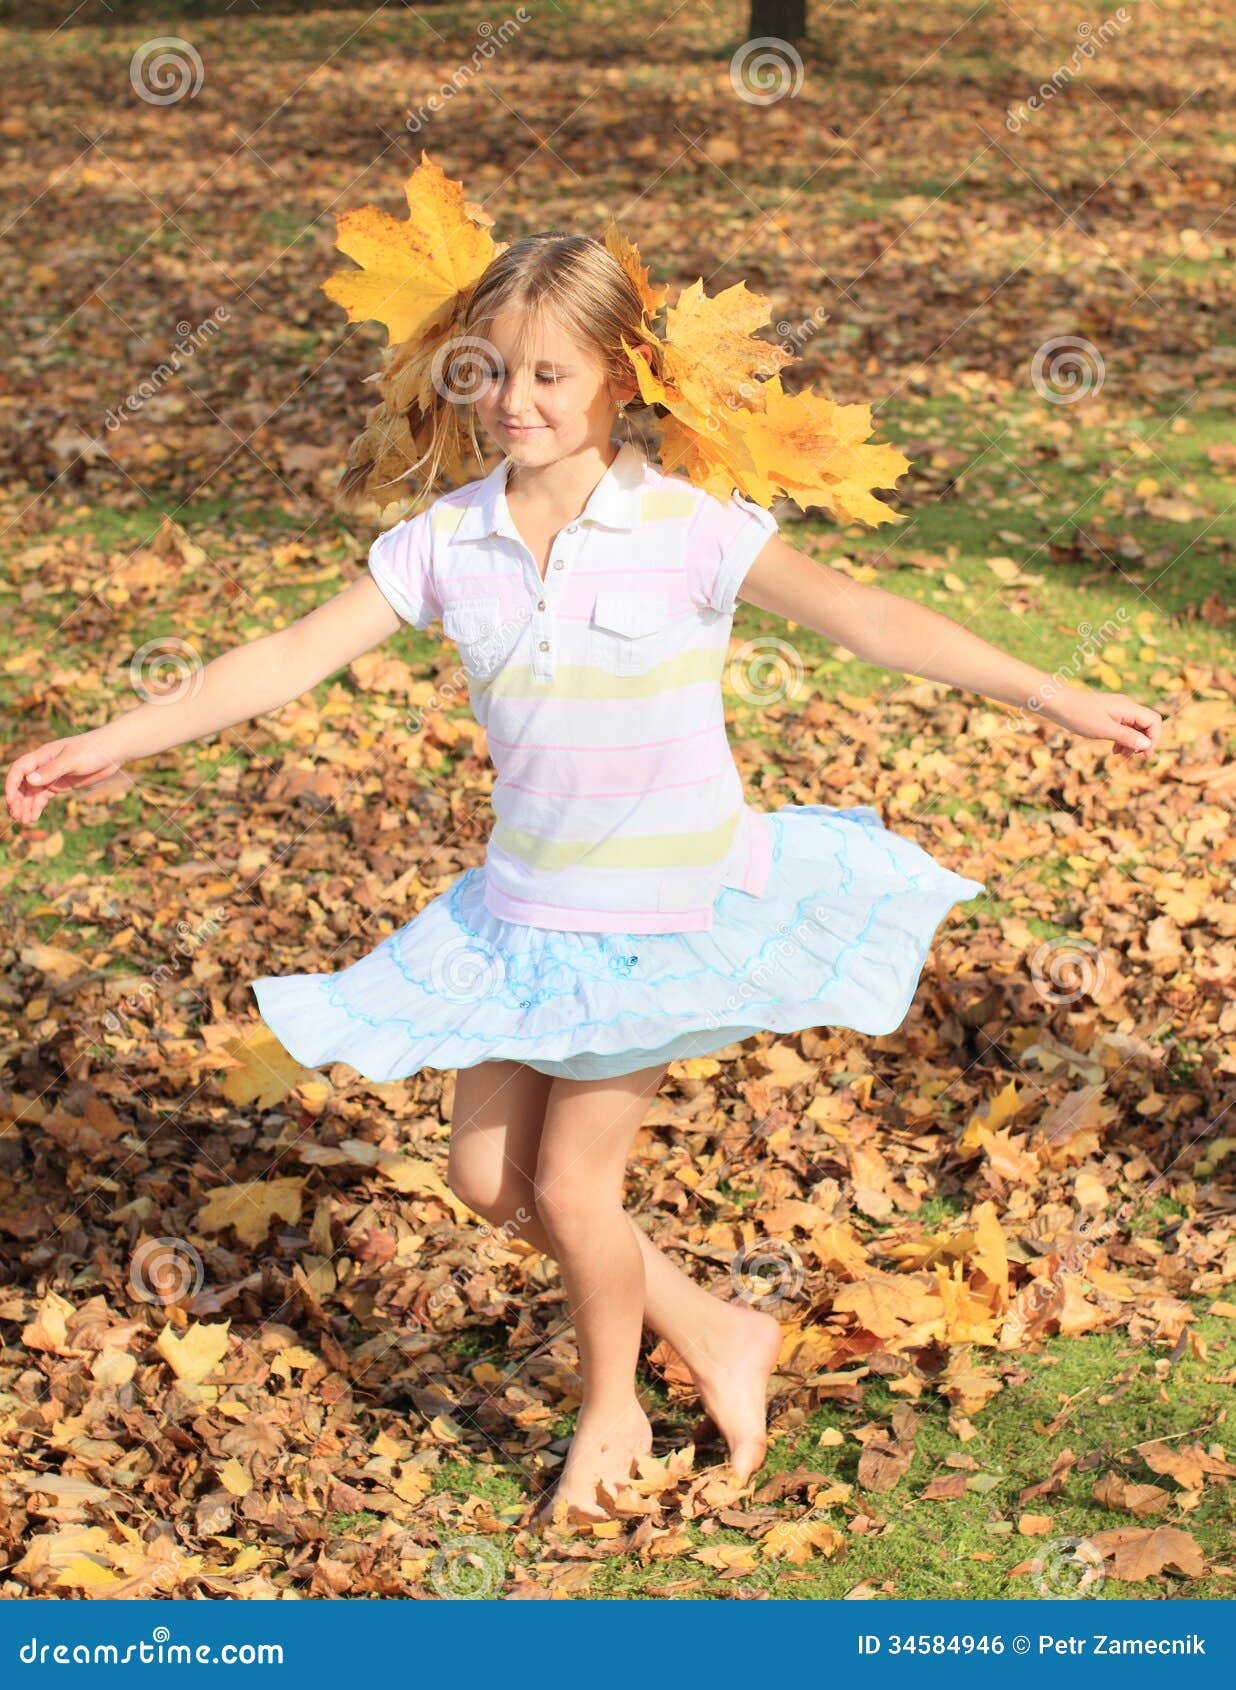 https://thumbs.dreamstime.com/z/girl-maple-leaves-dancing-barefoot-kid-smiling-blond-long-hair-decorated-fallen-autumn-as-nymph-34584946.jpg